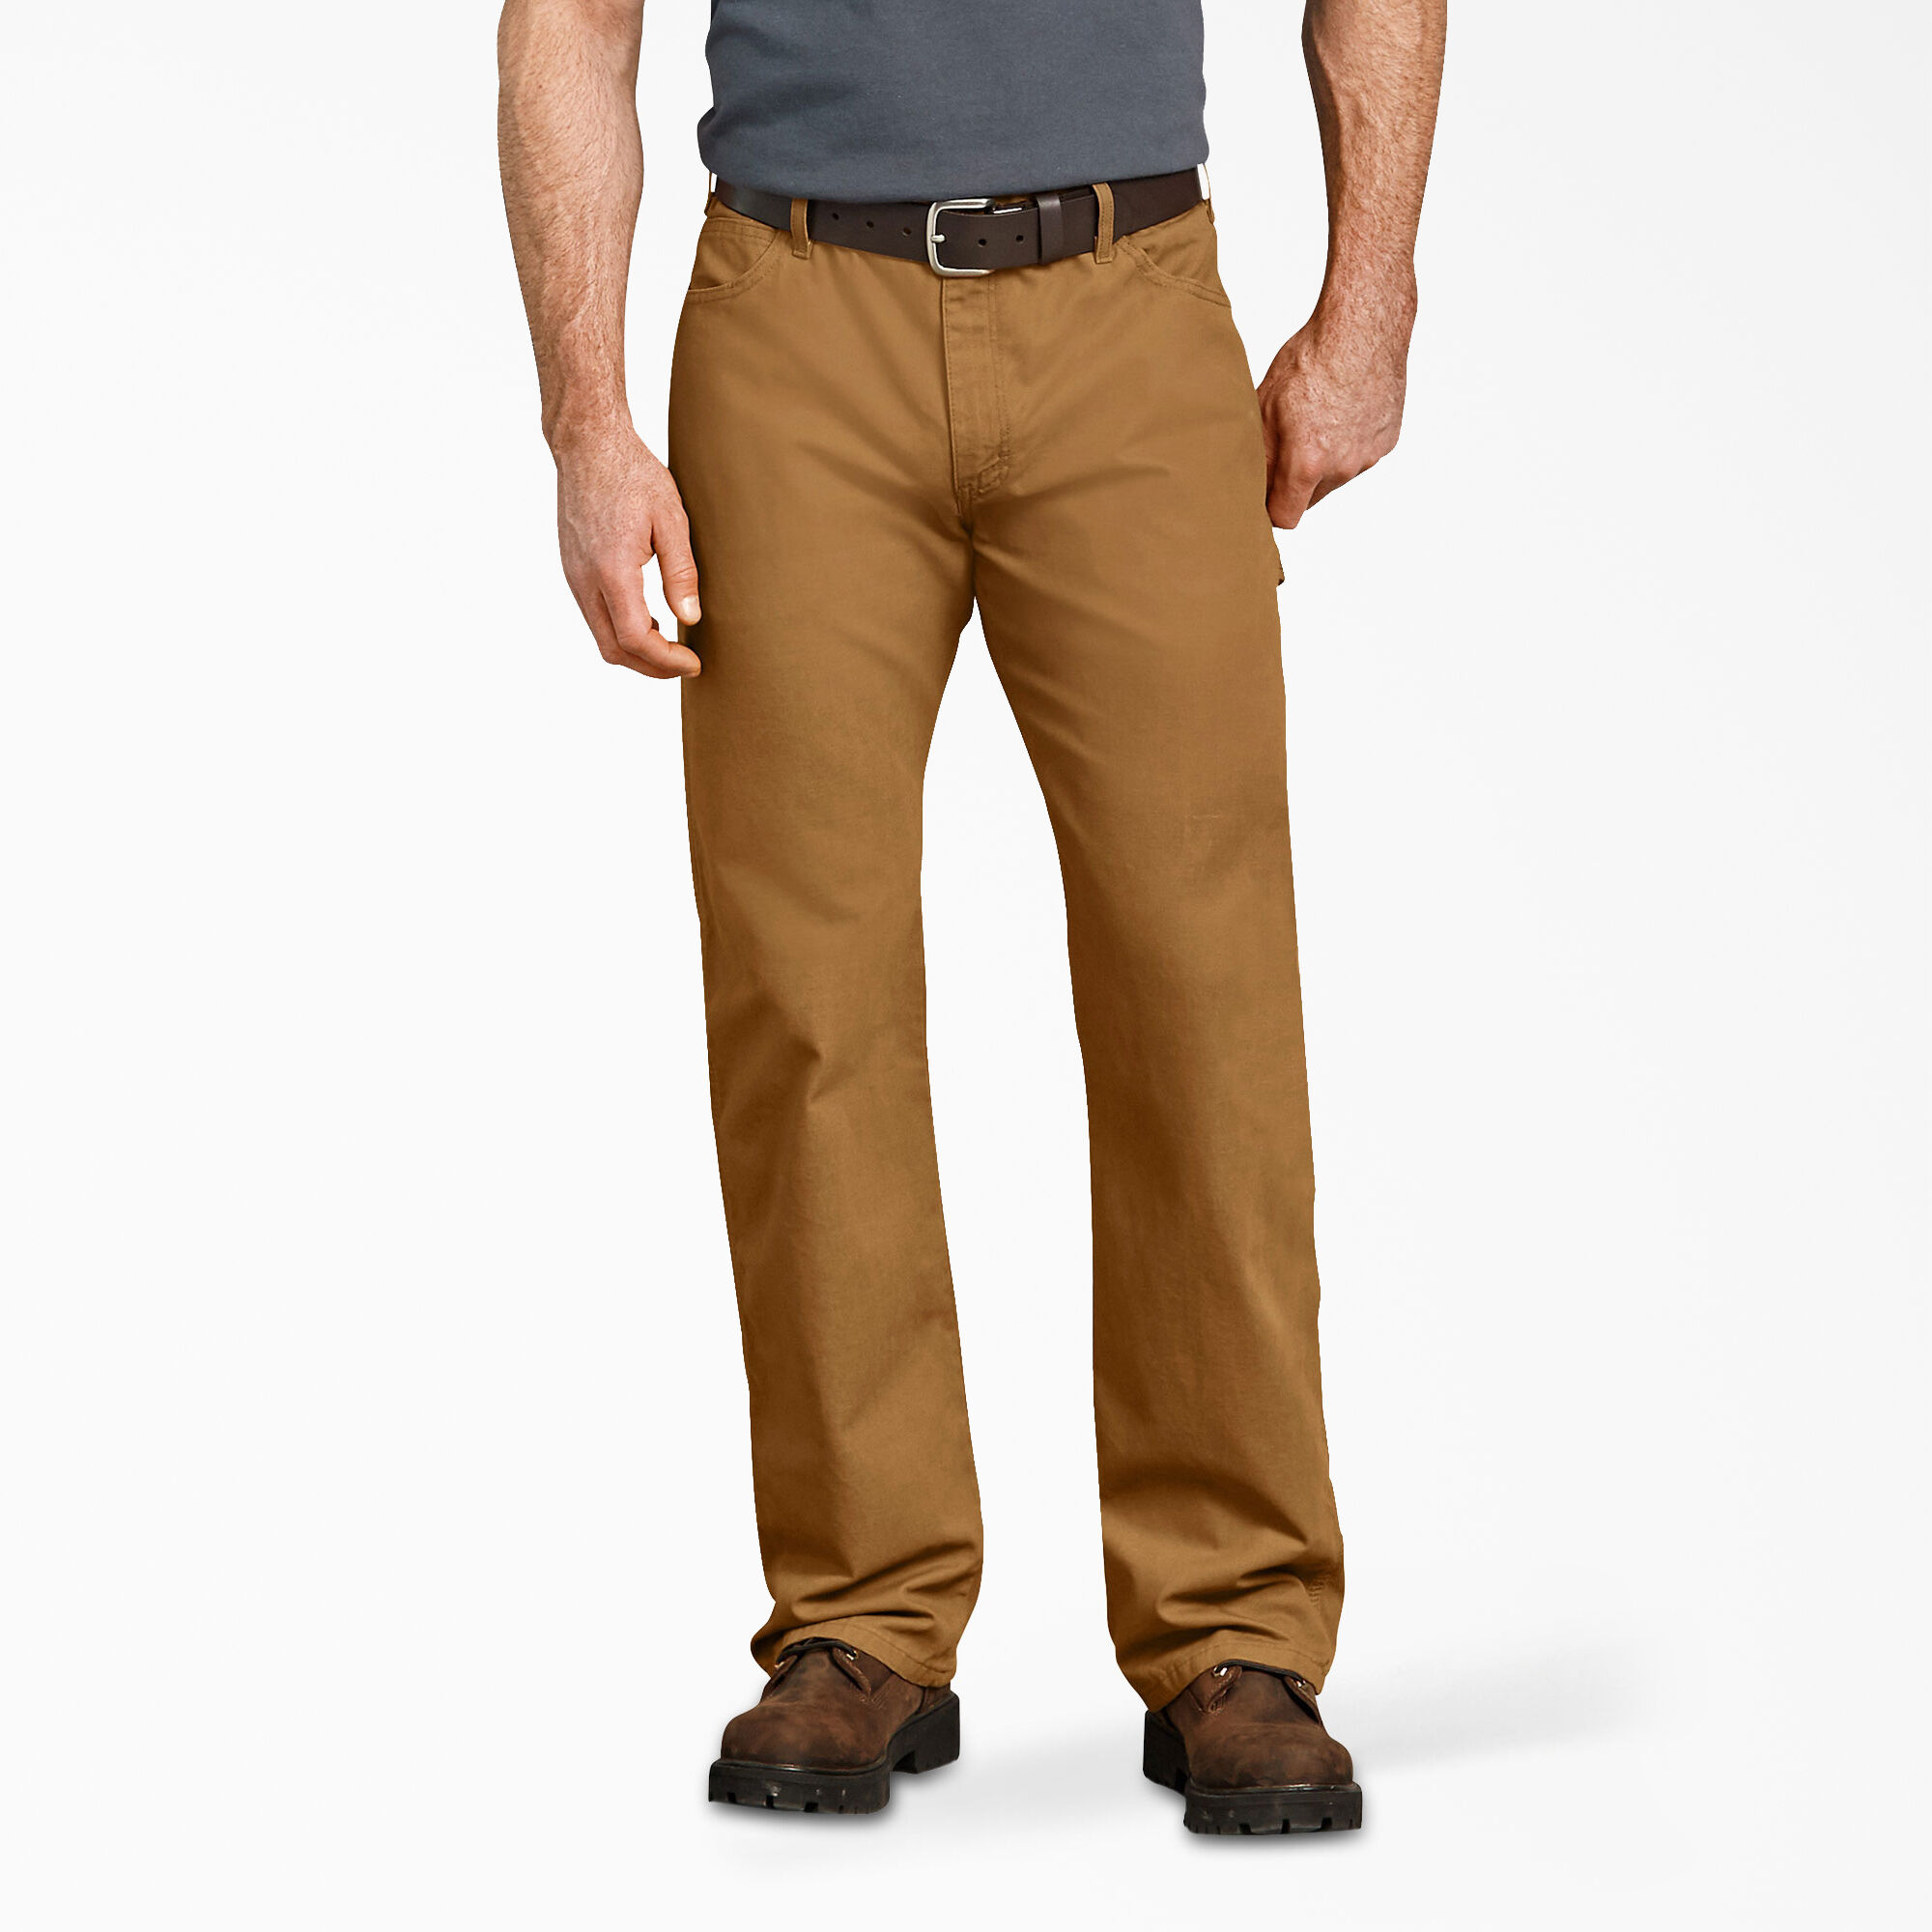 Relaxed Fit Straight Leg Duck Carpenter Pants